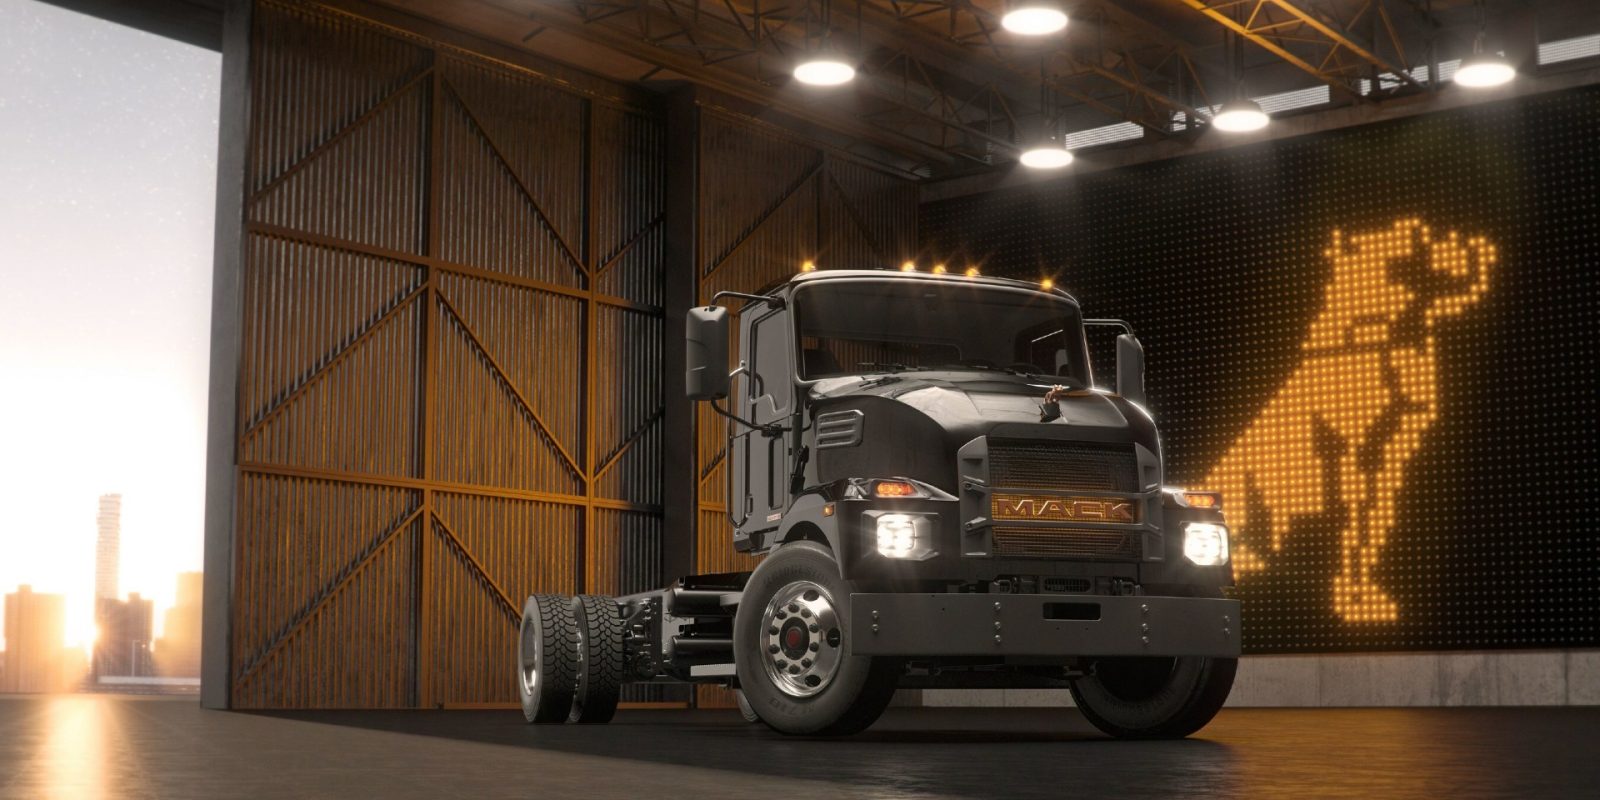 Mack Trucks offers a stress-free way to adopt an EV: subscription plans